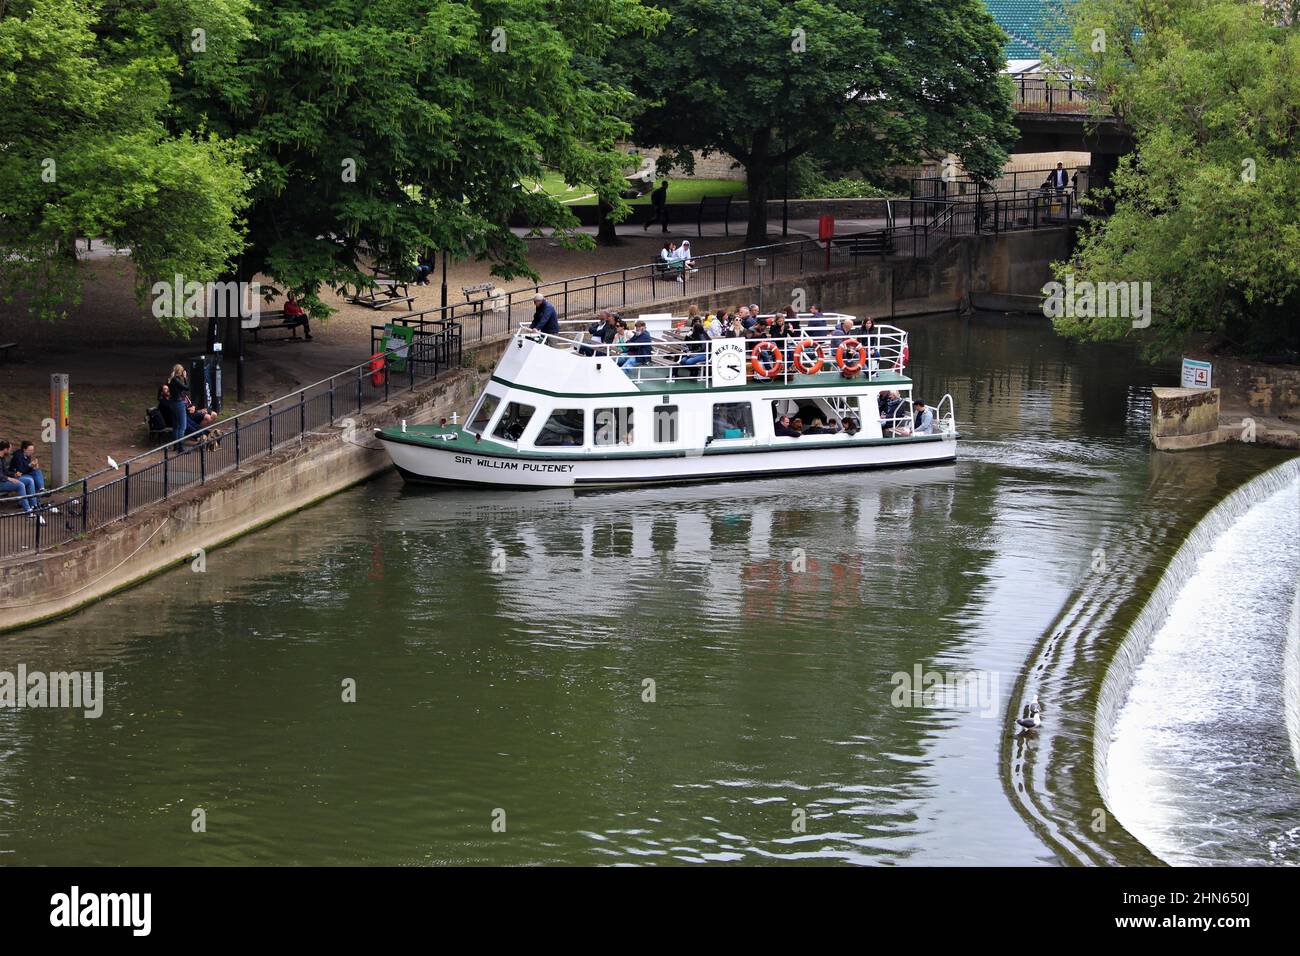 Tourism river boat rides in Bath, England Stock Photo